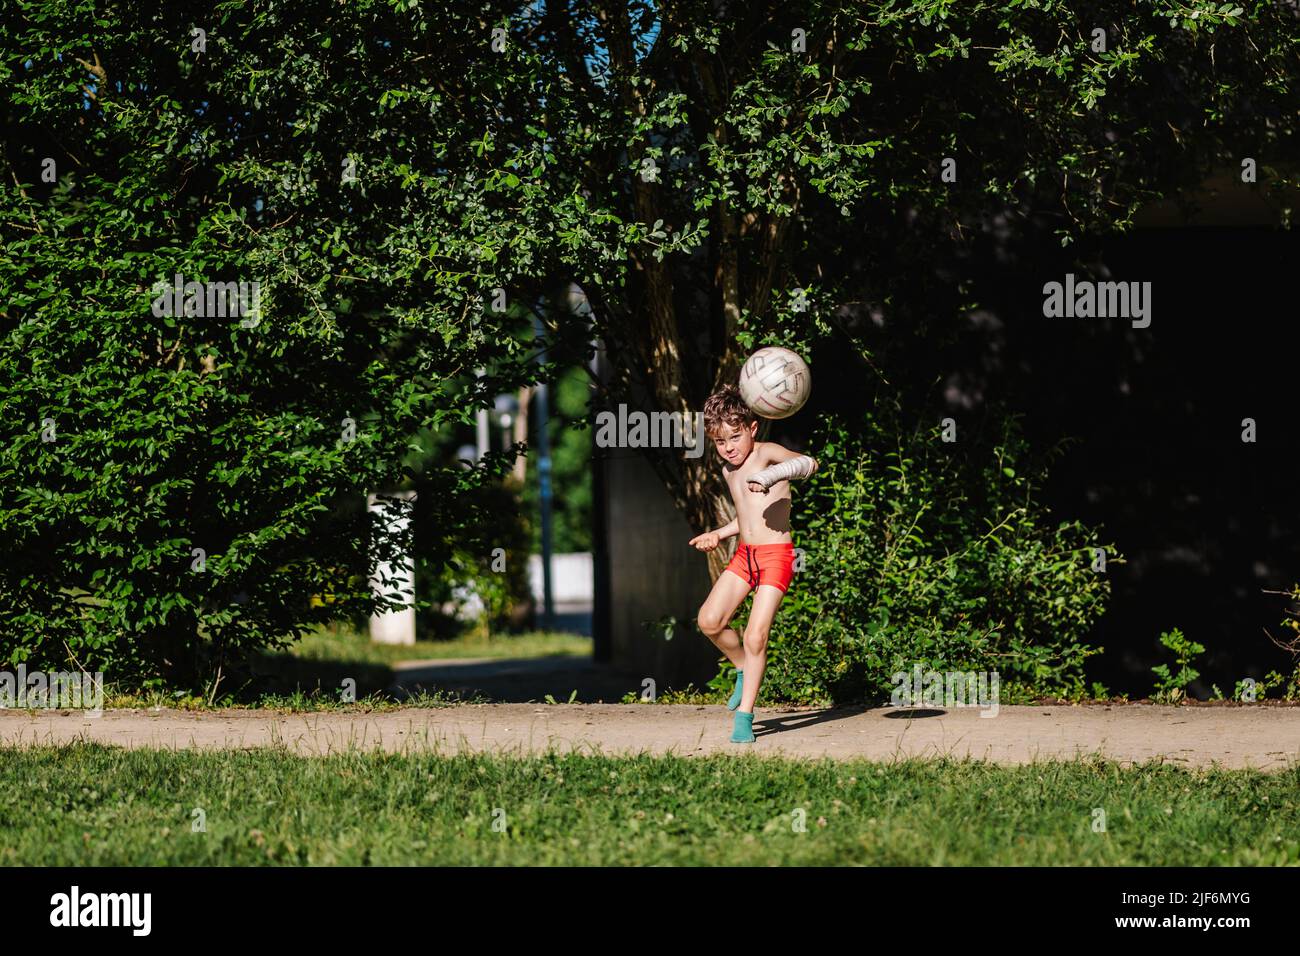 boy in red pants and casted arm kicking soccer ball on green lawn Stock Photo